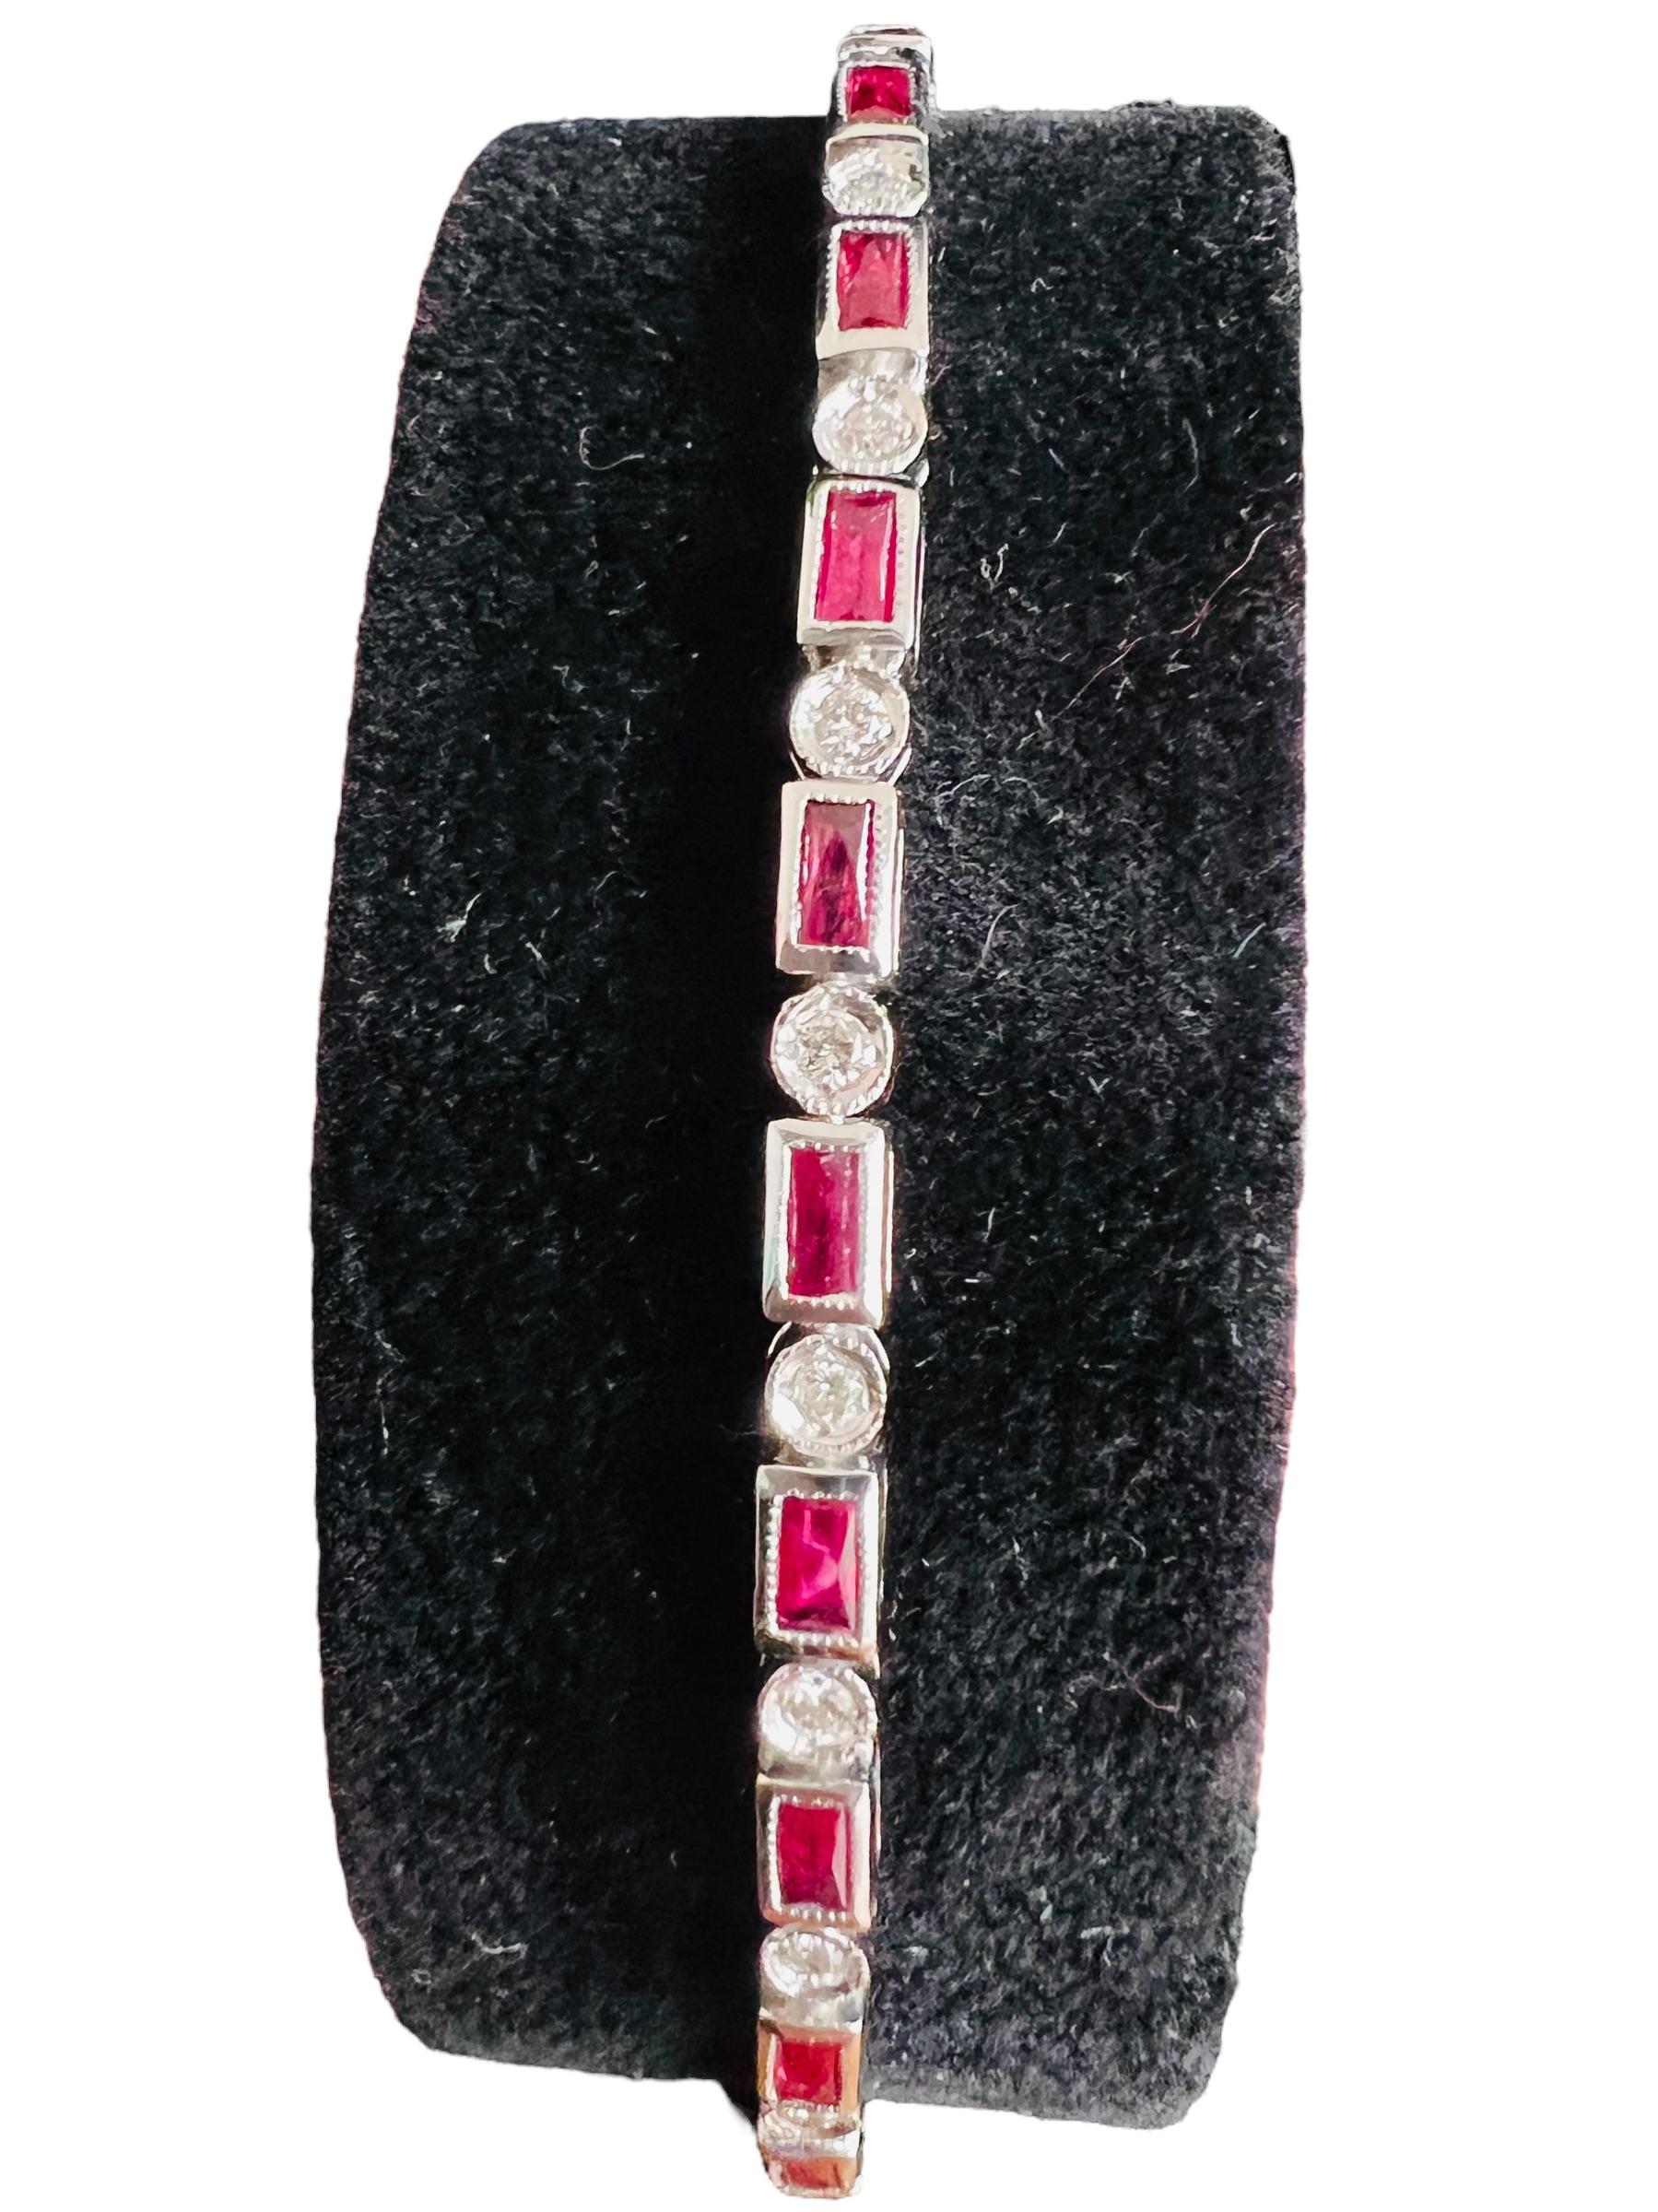 18 kt white gold bracelet set with diamonds and rubies
clasp with safety in 18 ct gold
total weight: 9.20gr
ruby: 13.67 ct
diamonds: 0.30 ct